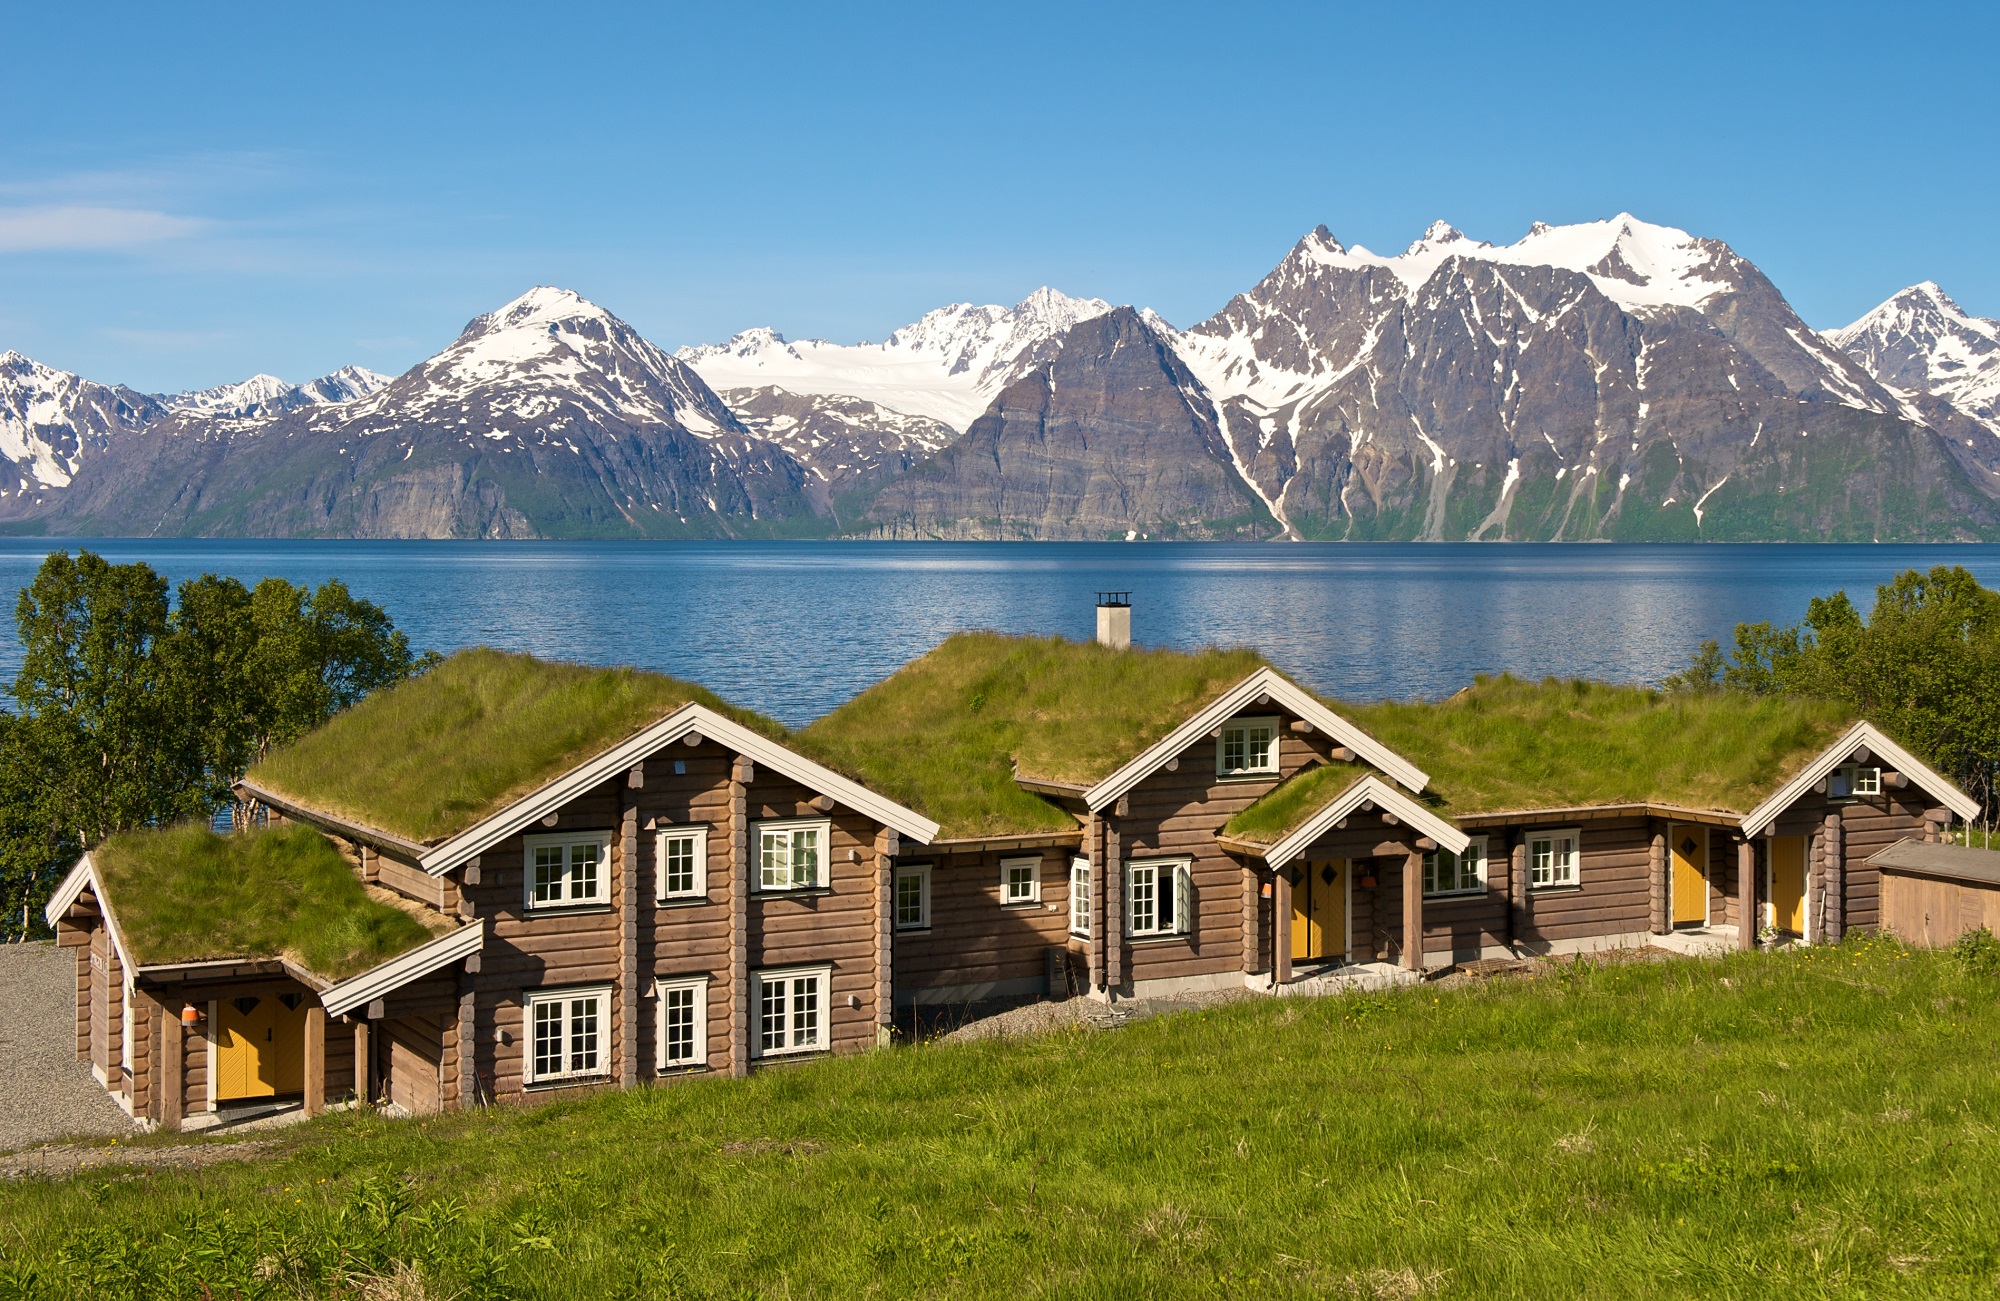 Exterior view in summer at Lyngen Lodge in Norway